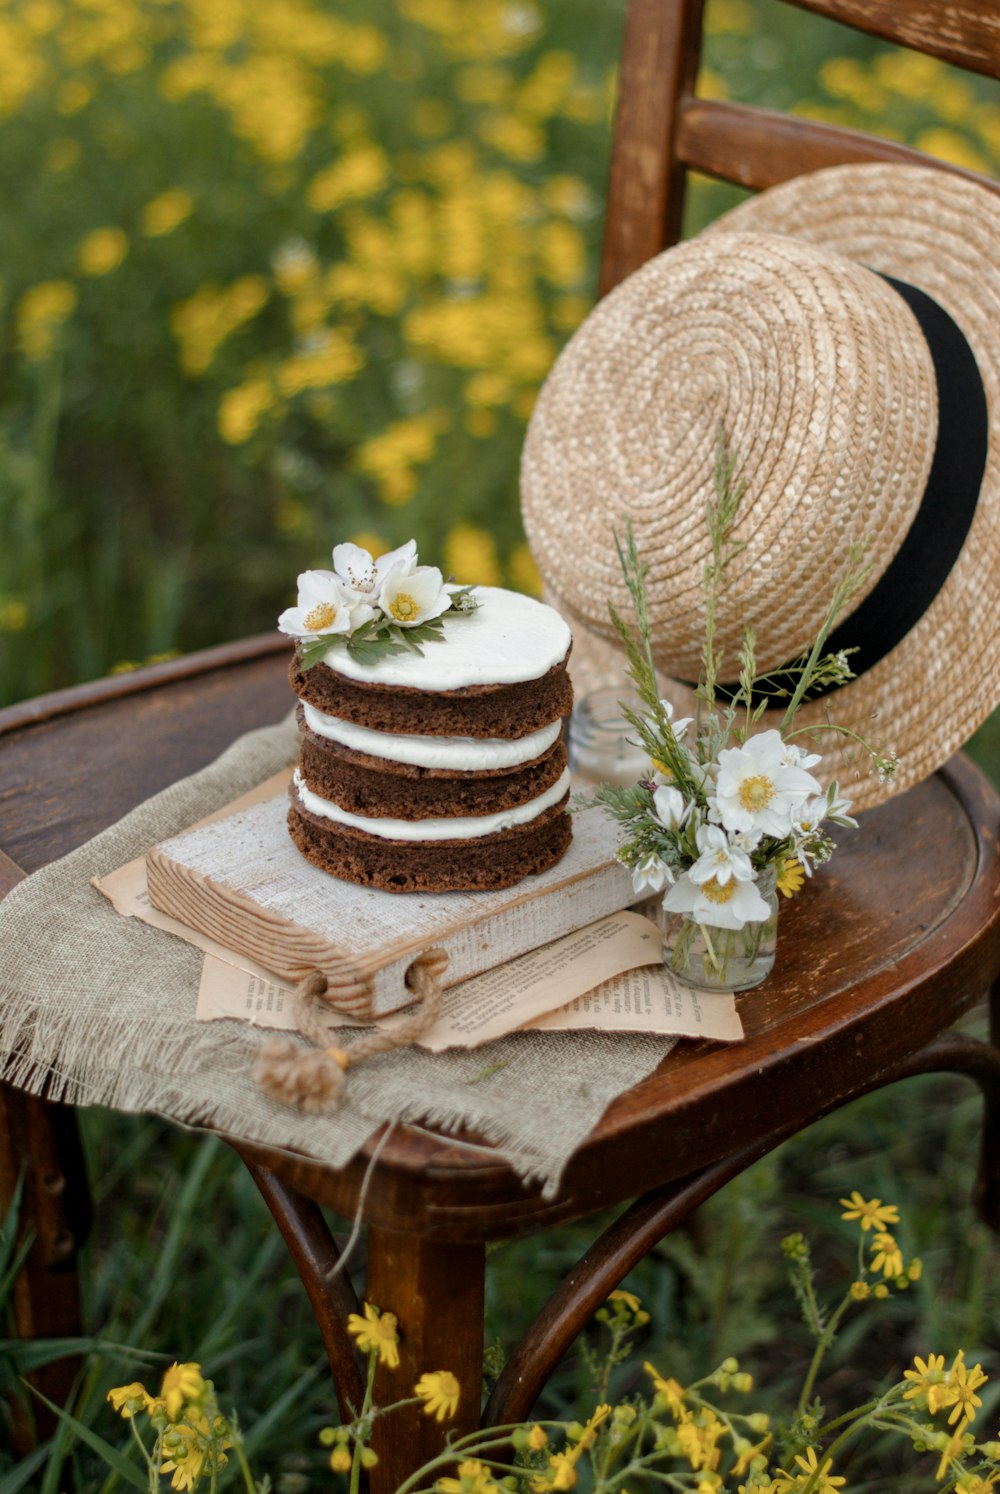 white and brown round hat on brown wooden table